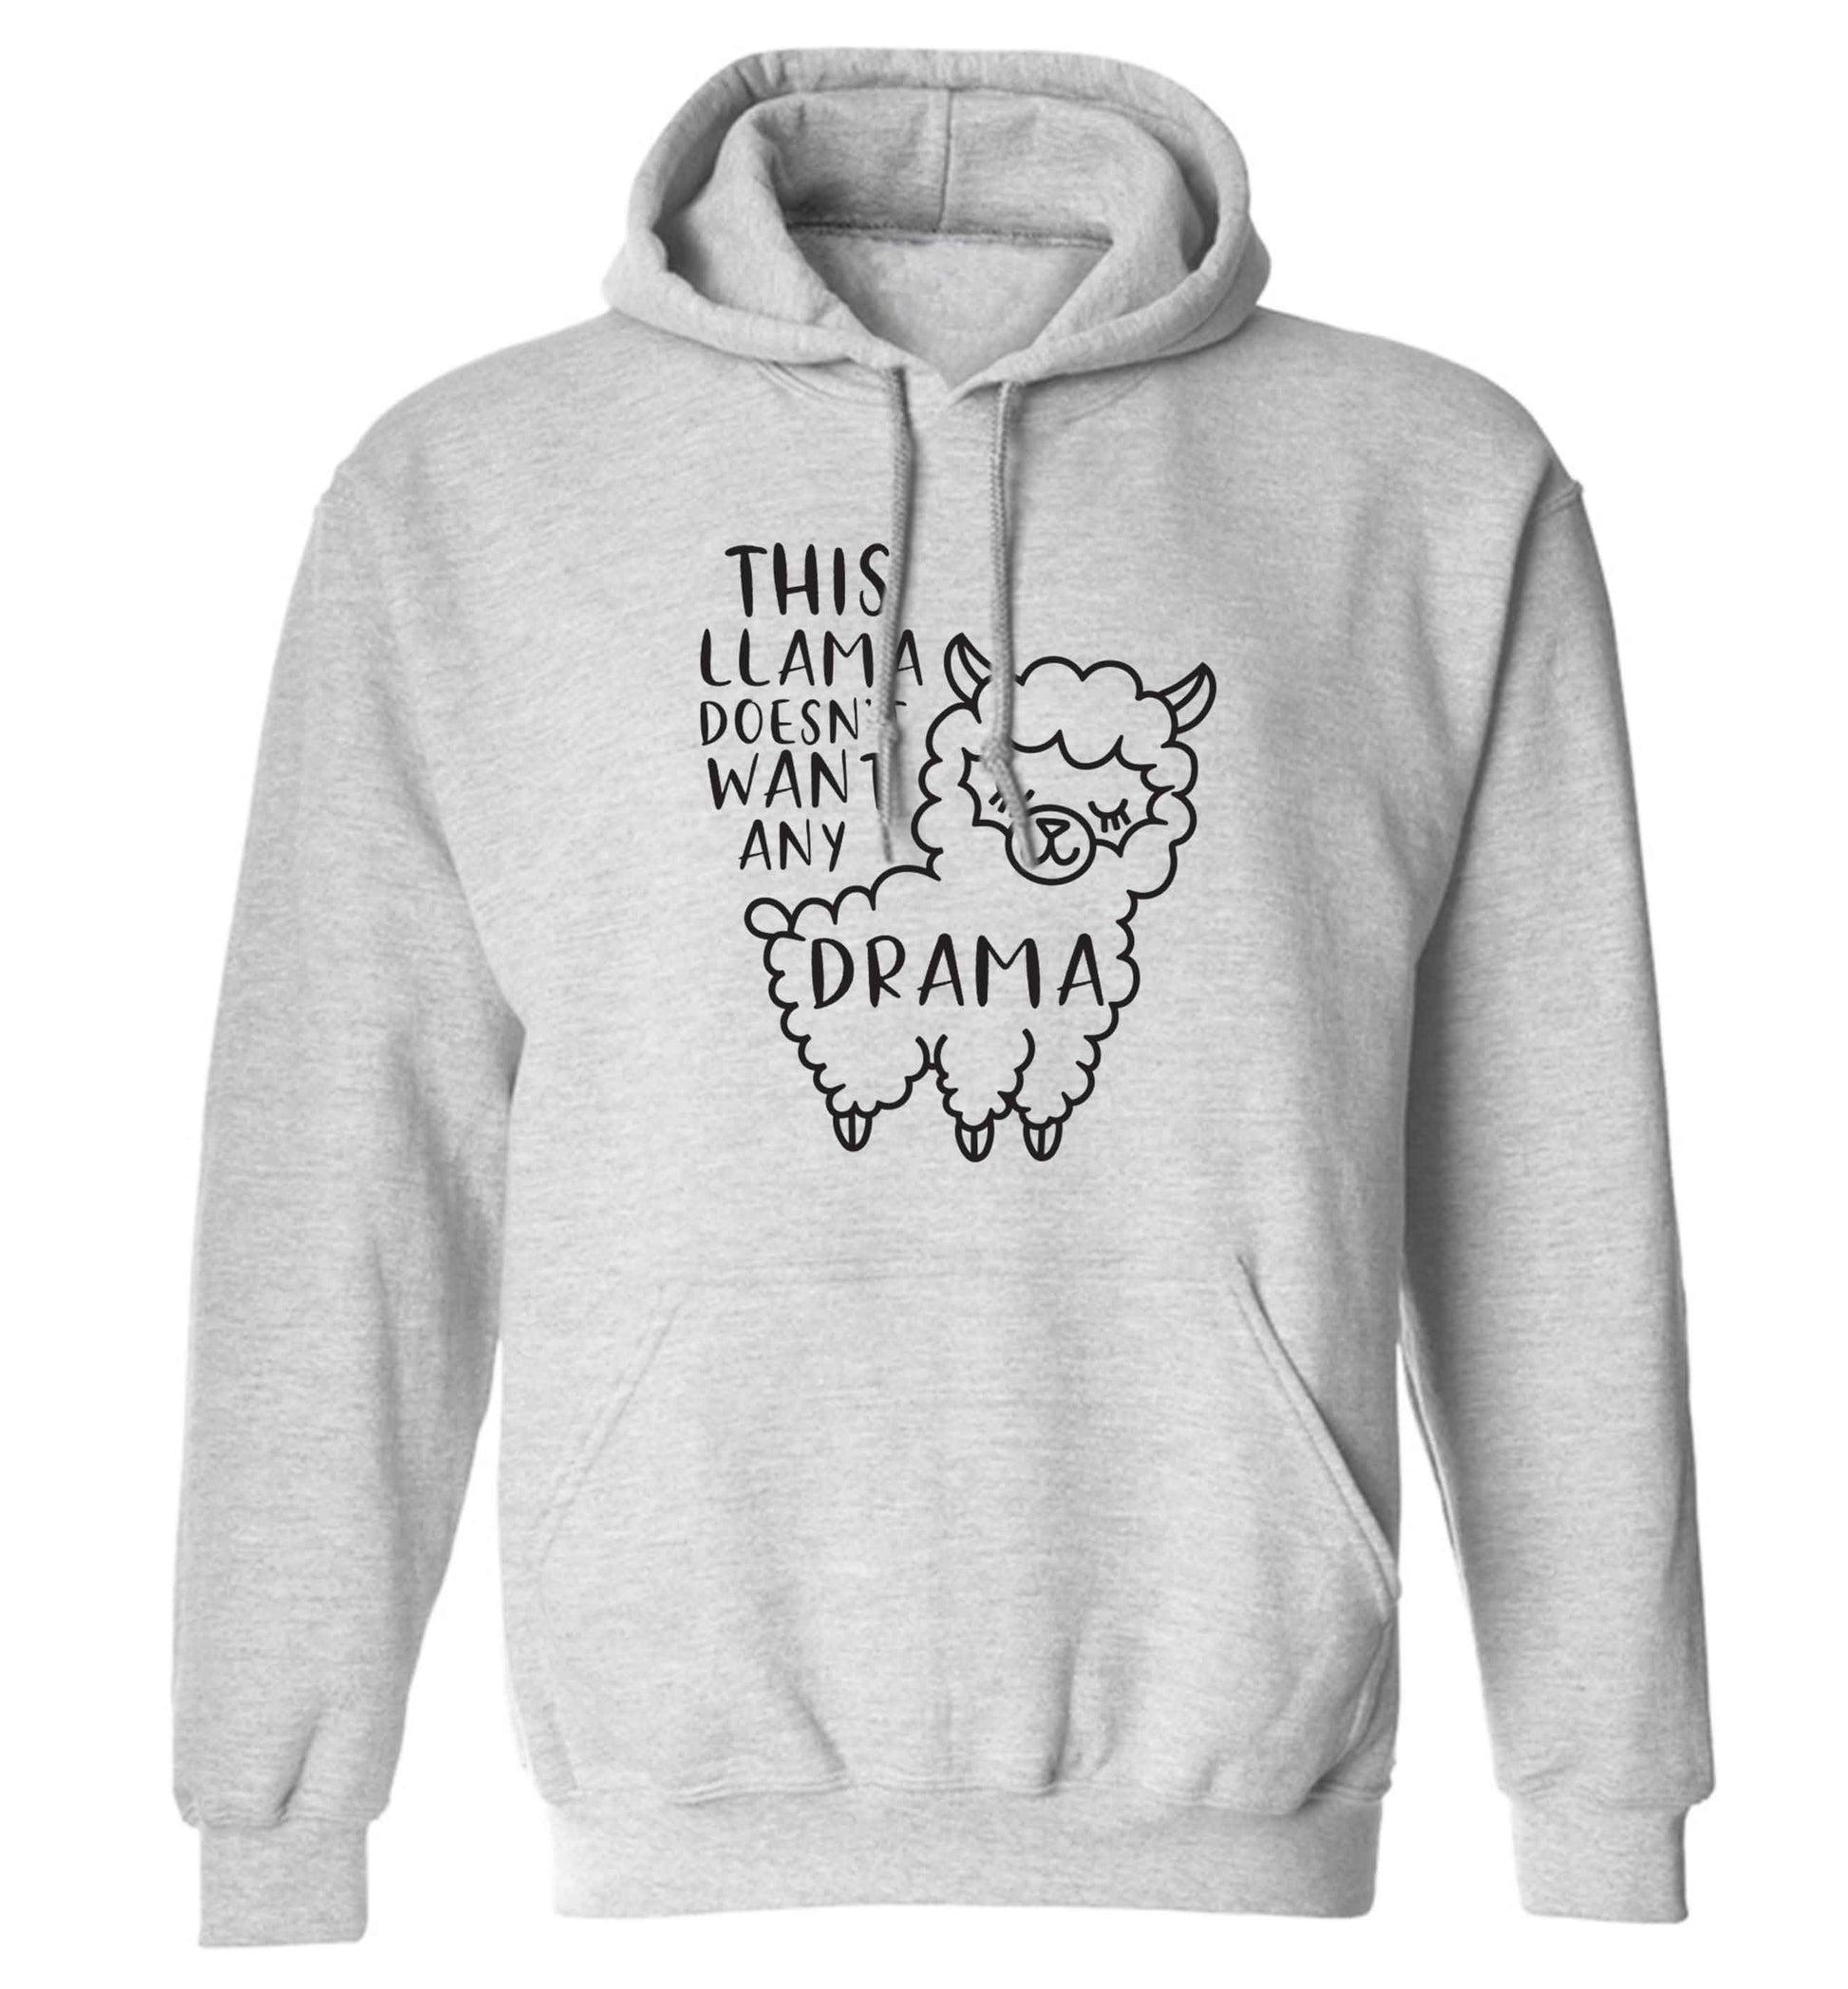 This Llama doesn't want any drama adults unisex grey hoodie 2XL